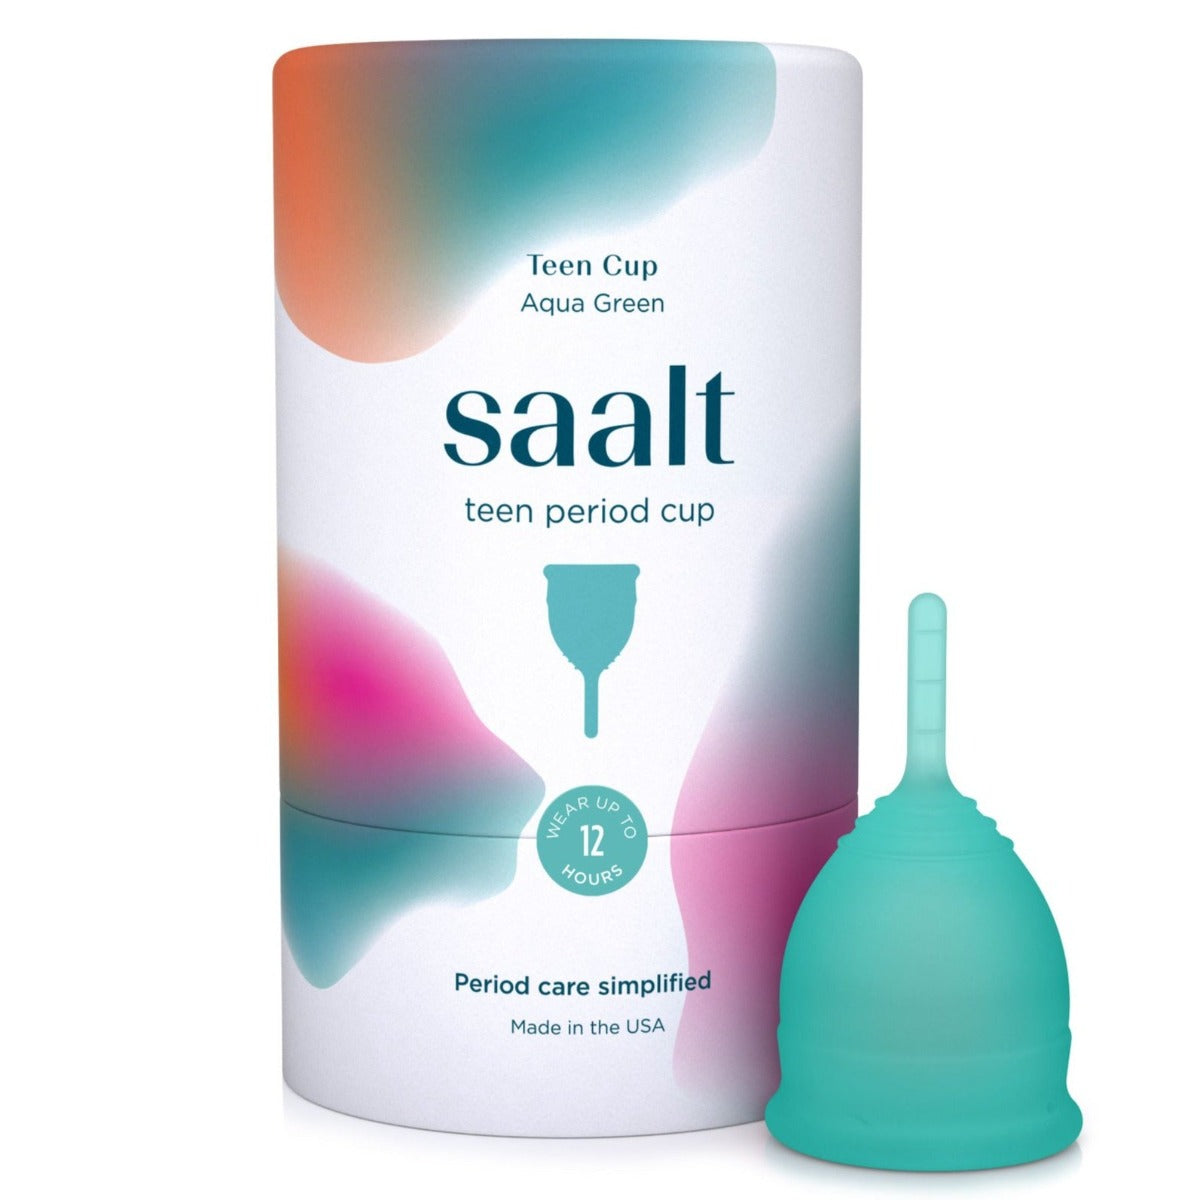 Menstrual Cups, Eco-Friendly Period Product